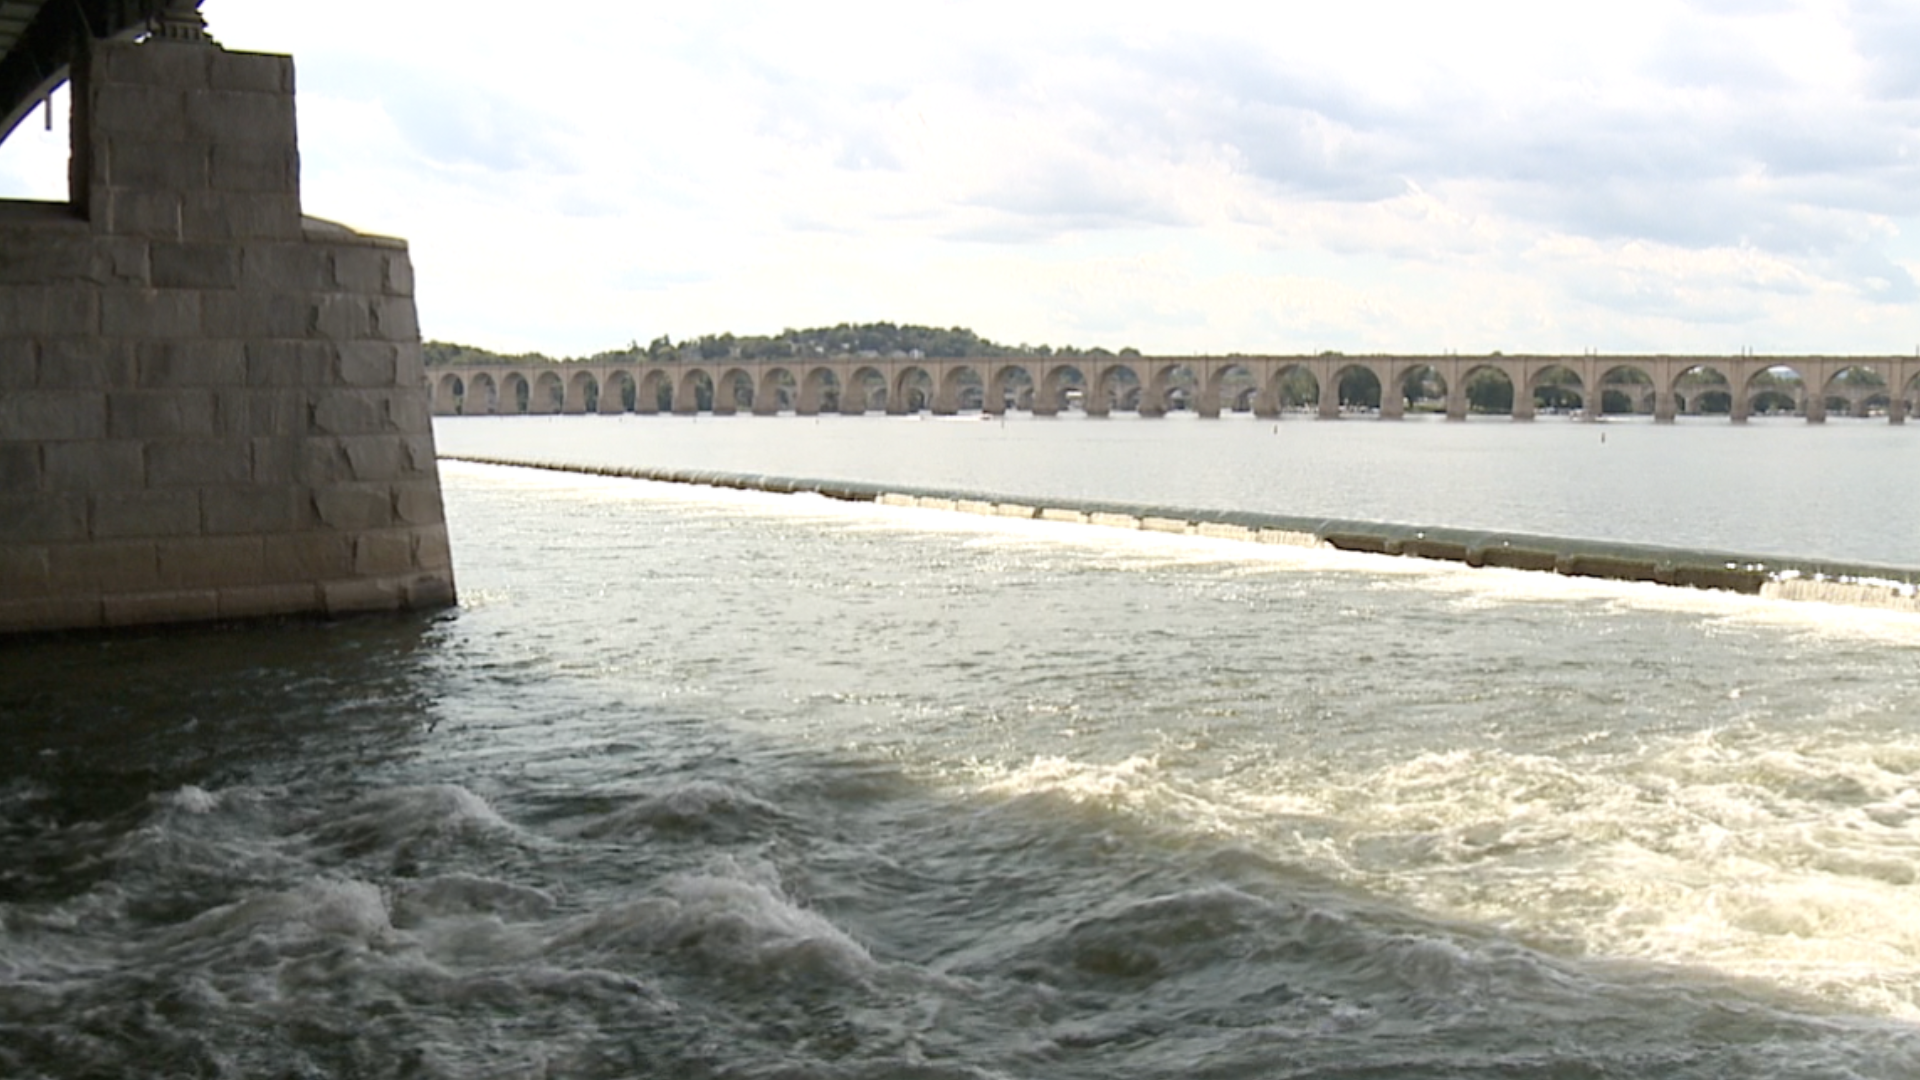 Authorities say a man held a woman at knifepoint while atop a vehicle in the Susquehanna River.